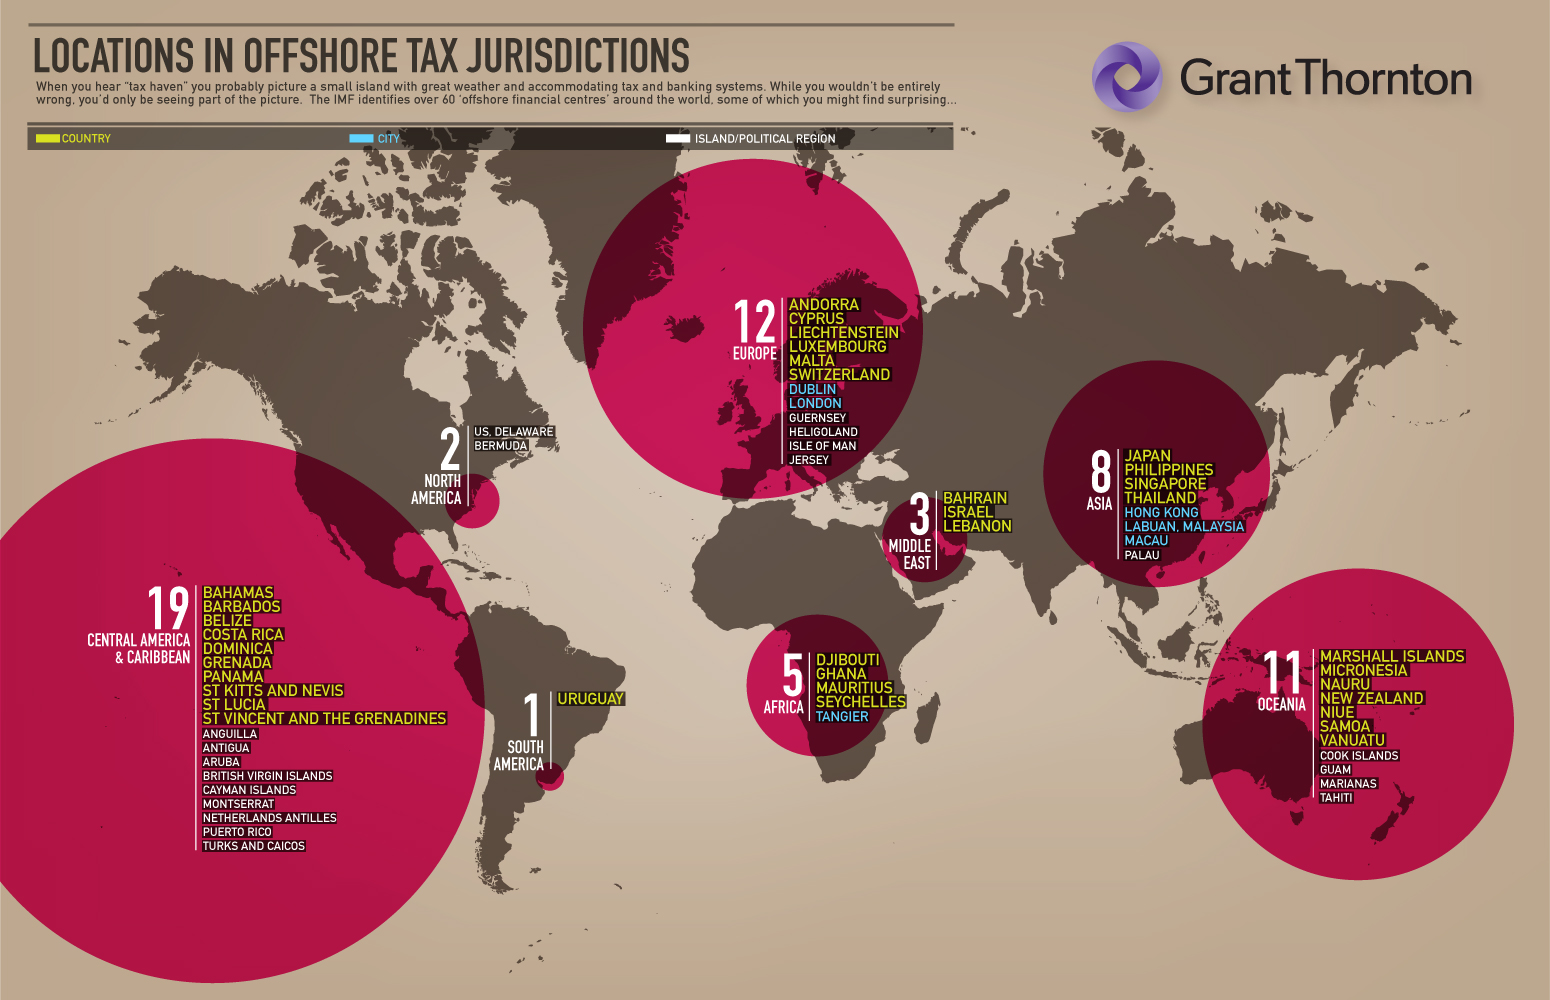 locations_in_offshore_tax_jurisdictions_large.jpg